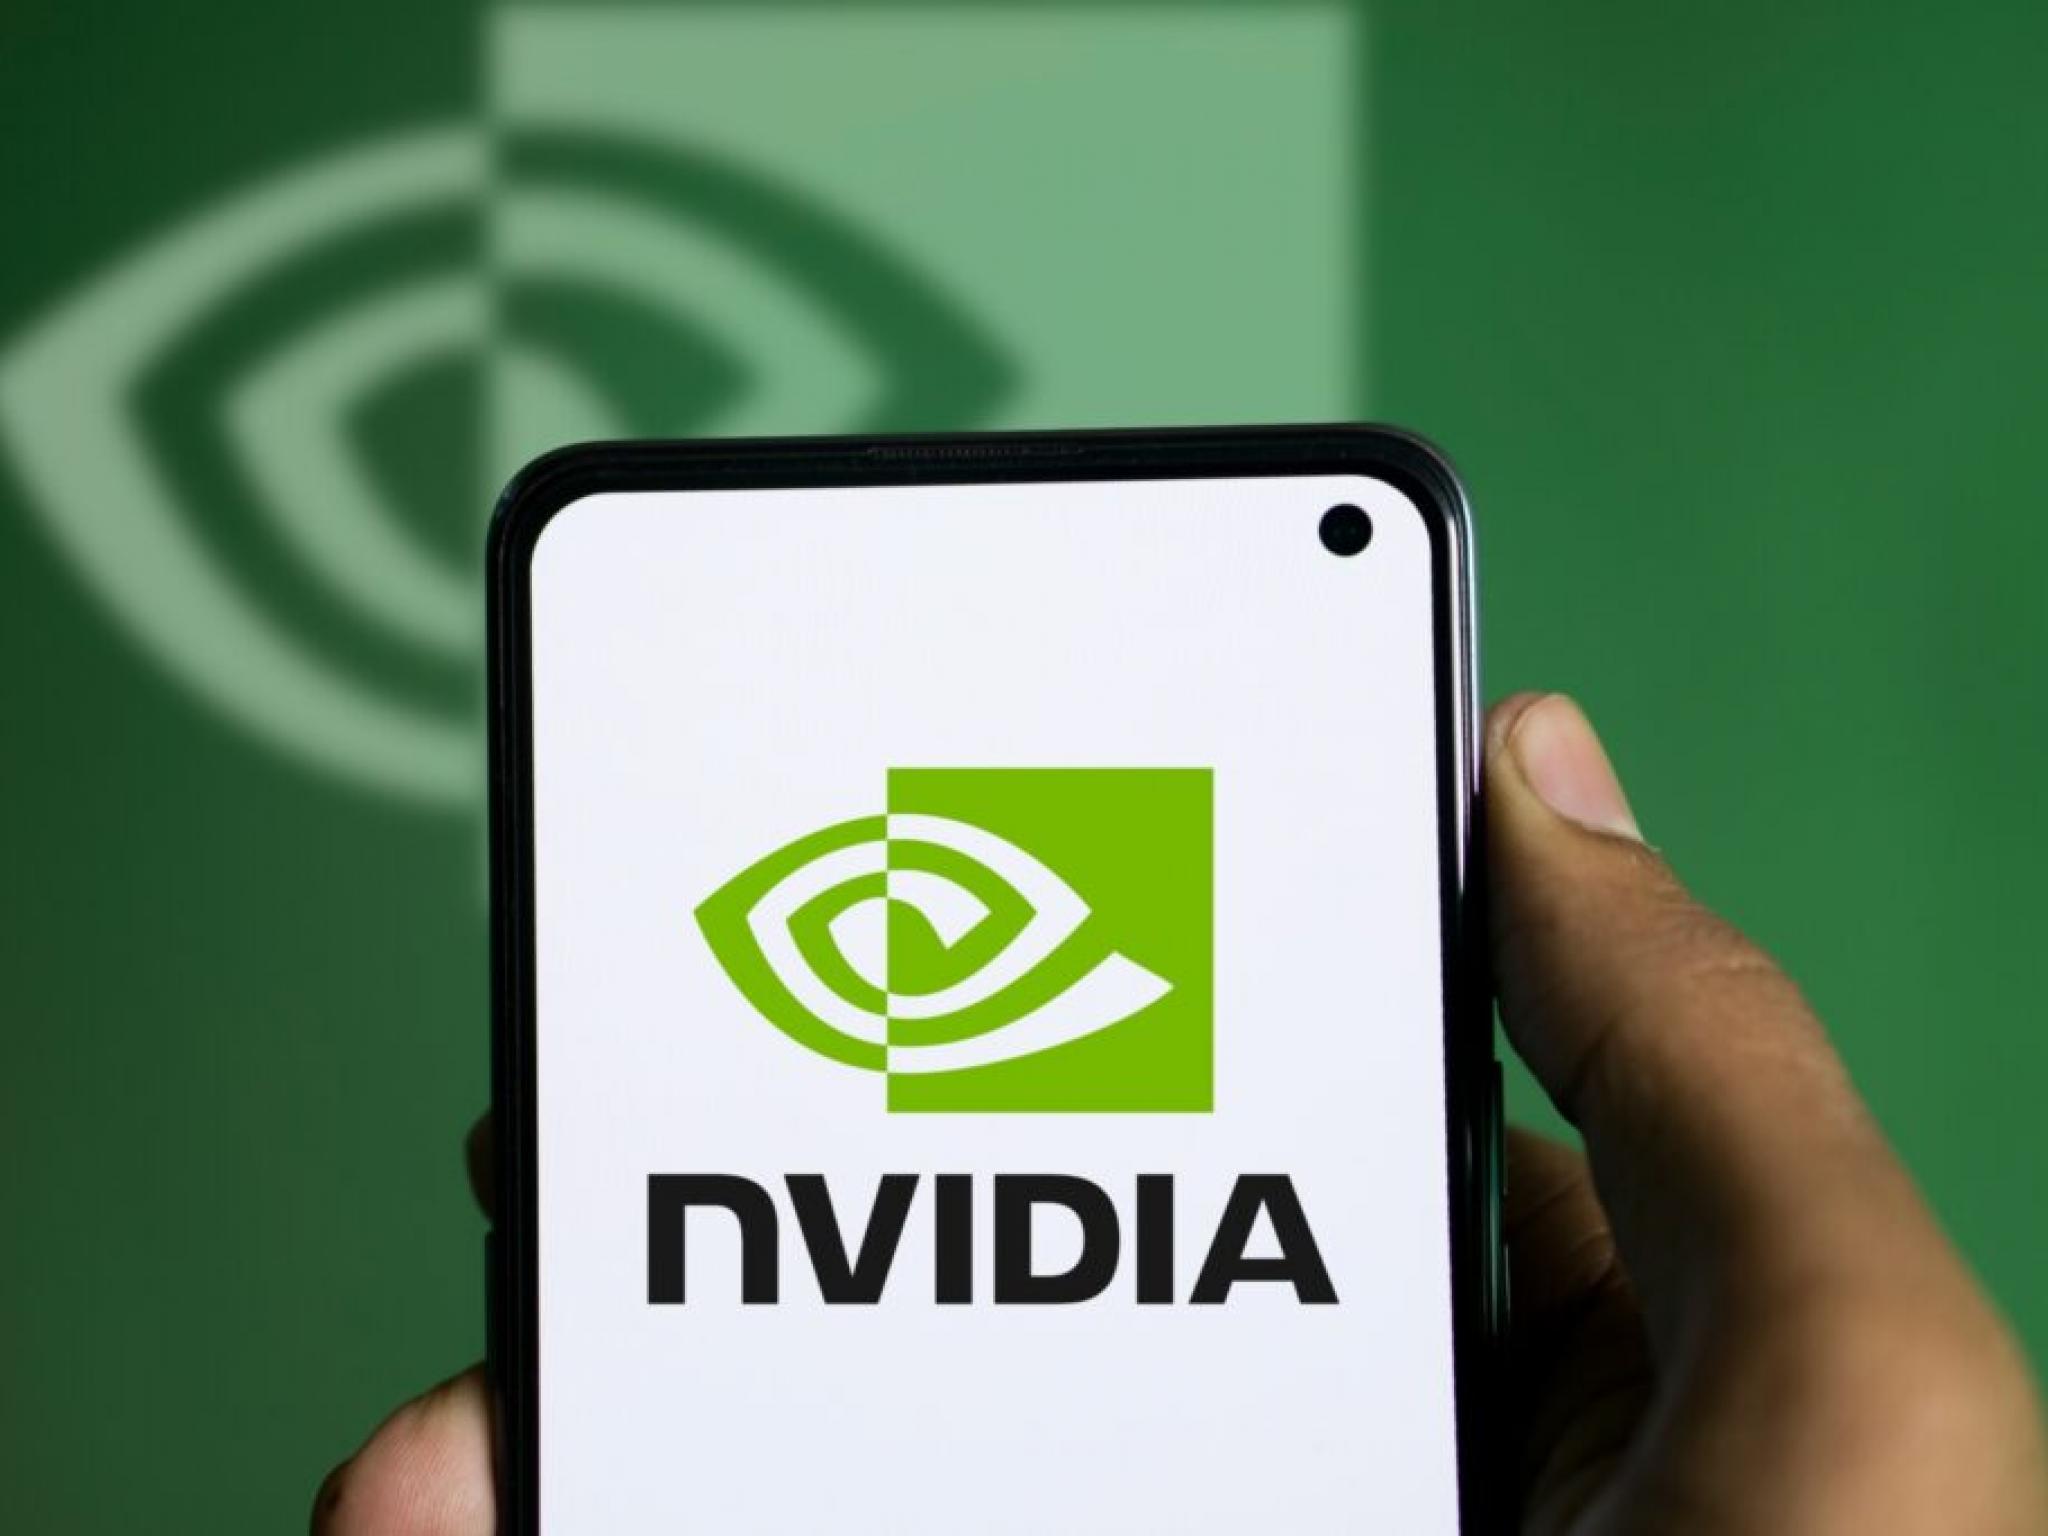  nvidias-record-quarter-a-taylor-swift-moment-for-industry-says-wedbushs-dan-ives-puts-jet-fuel-in-this-tech-bull-market 